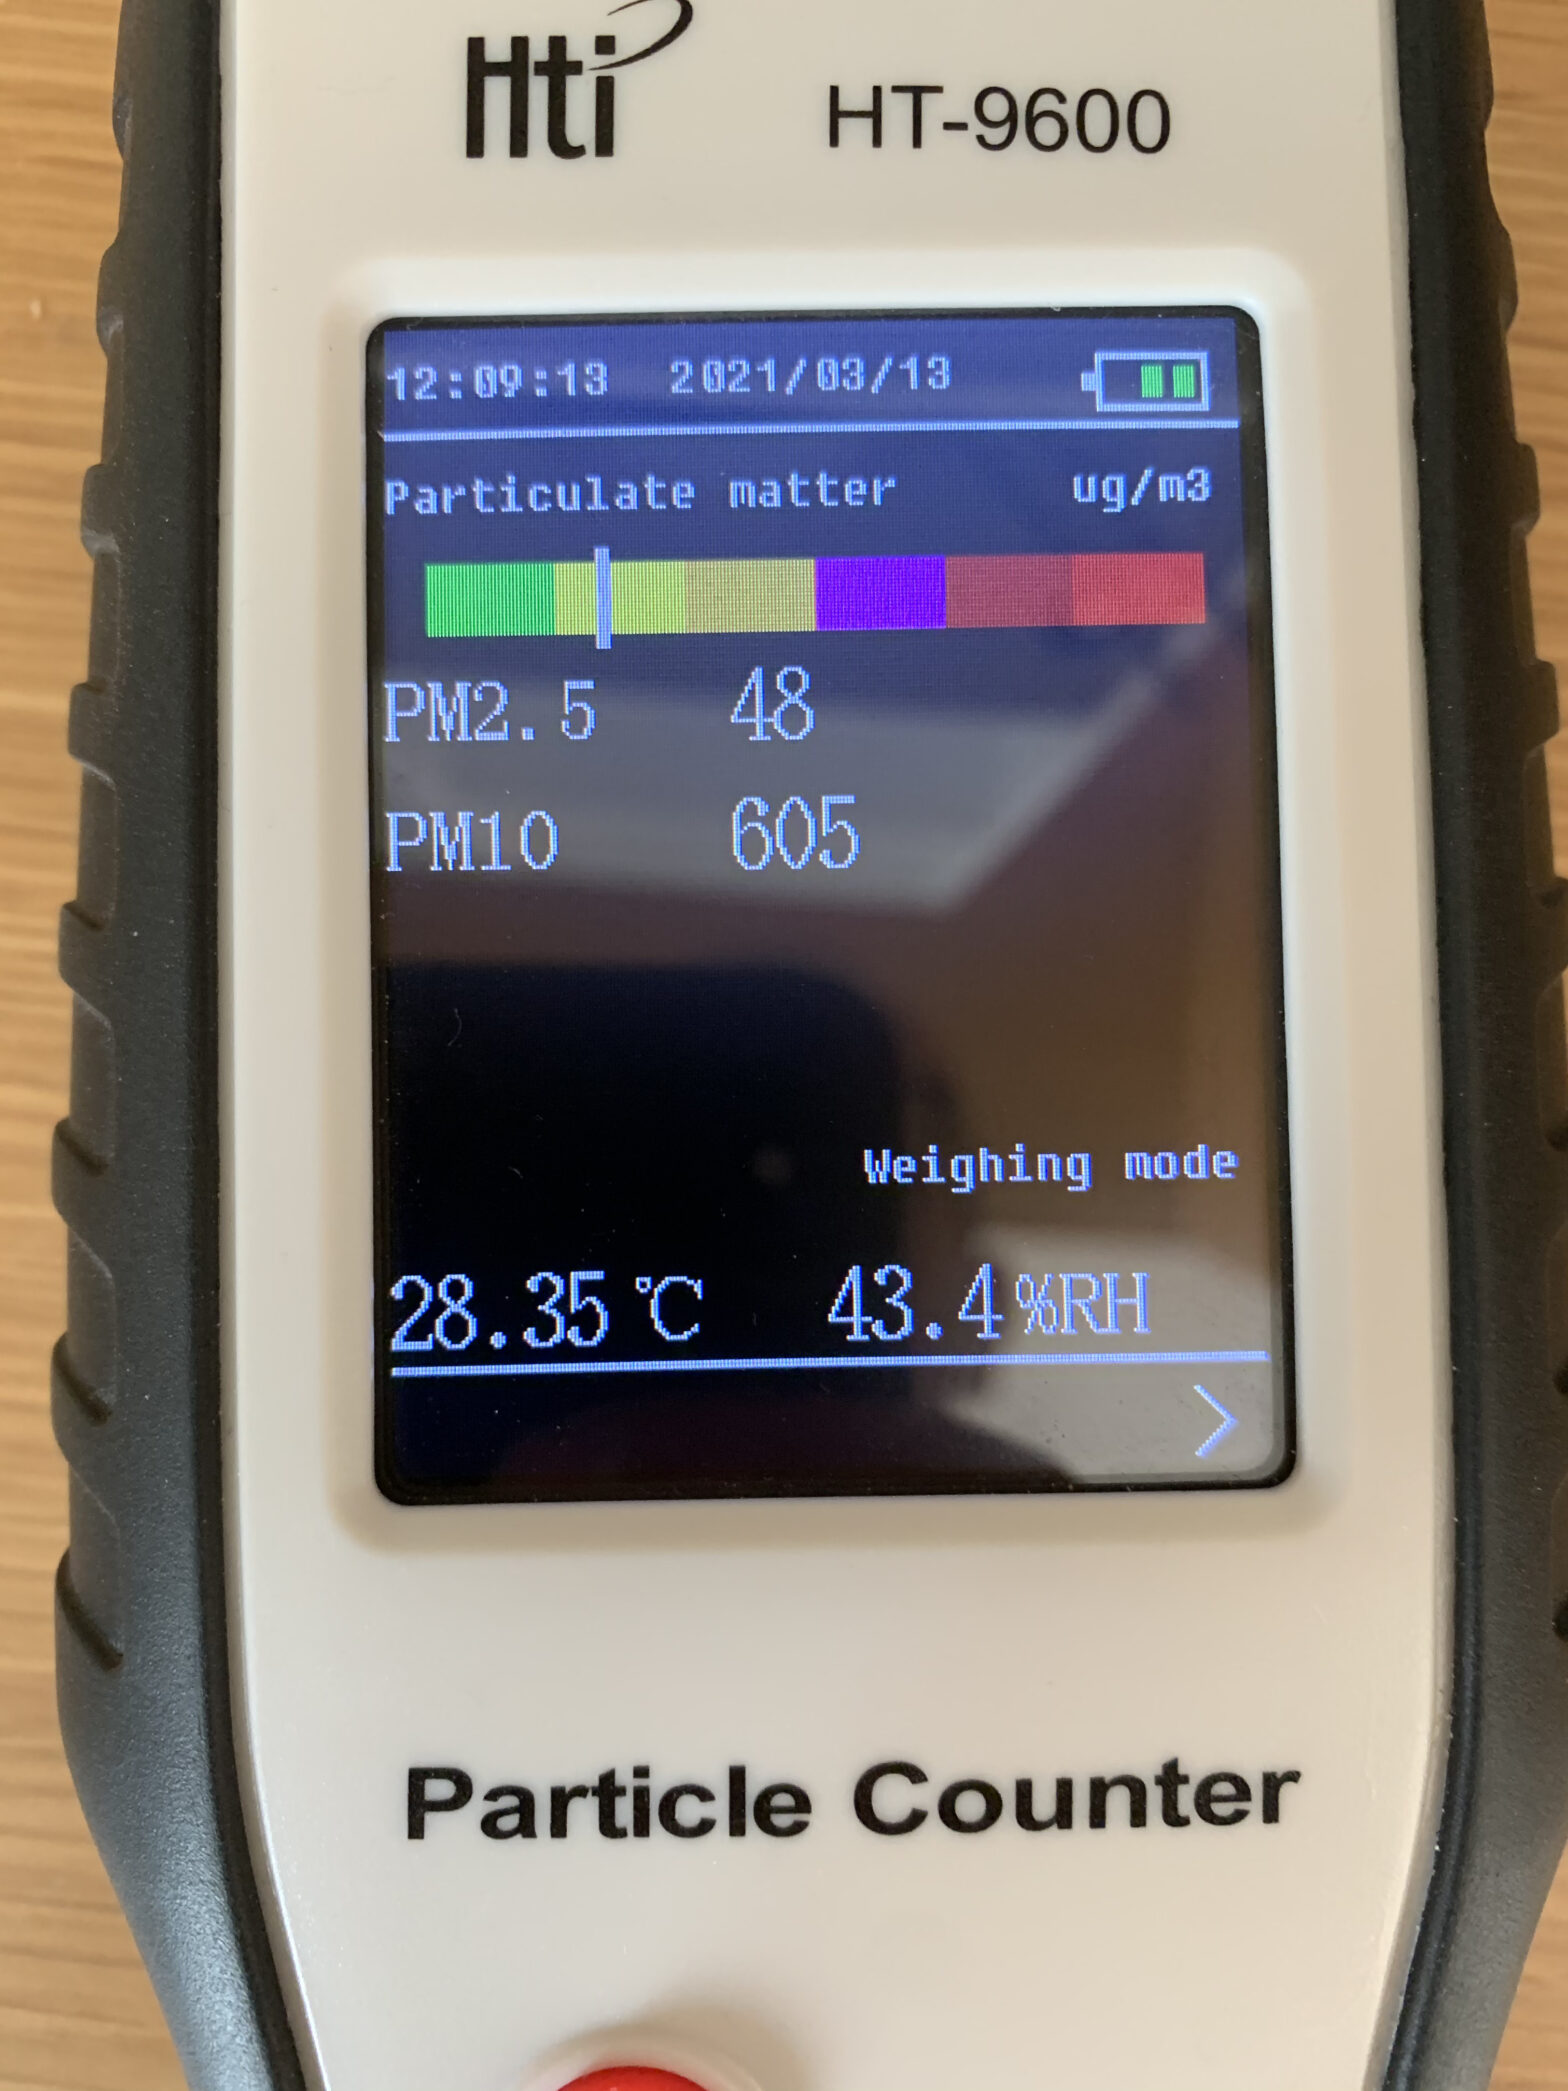 Pariculate matter during a dust storm: pm10 at 605 μg/m3